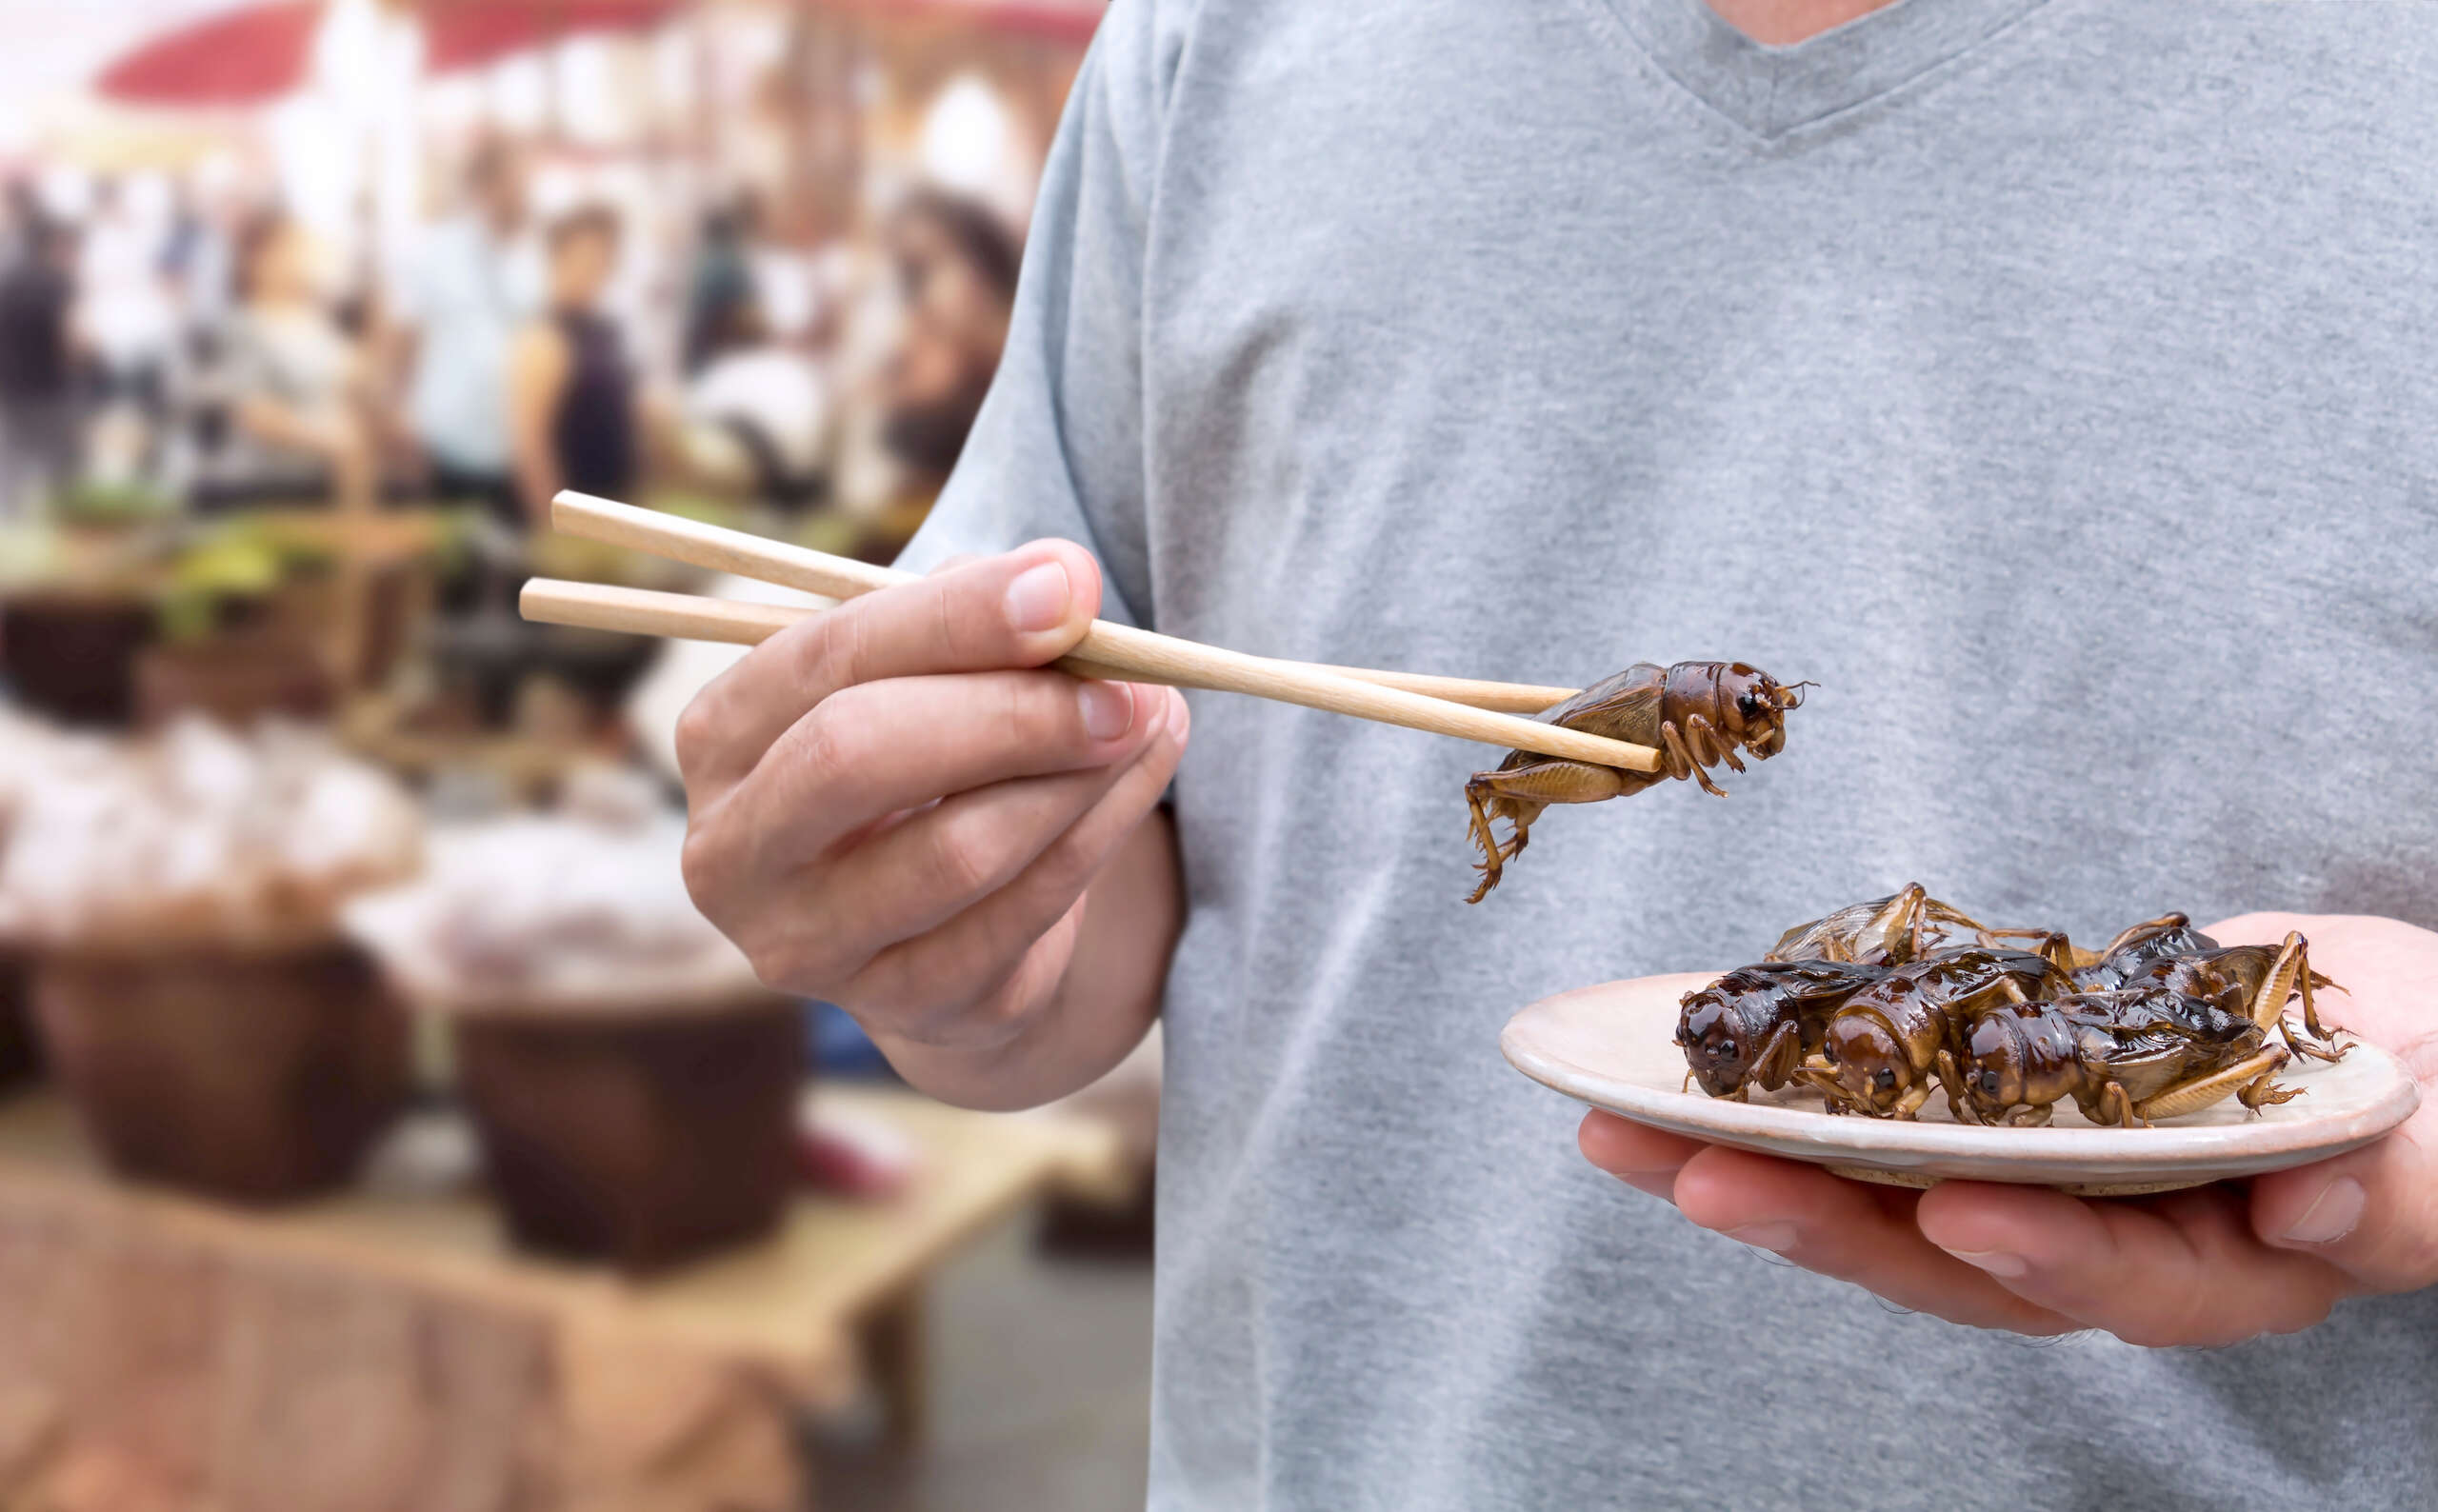 Food Insects: Man's hand holding chopsticks eating Cricket insect deep-fried for eat as food snack on street food background, it is good source of meal high protein edible and delicious. Entomophagy concept.